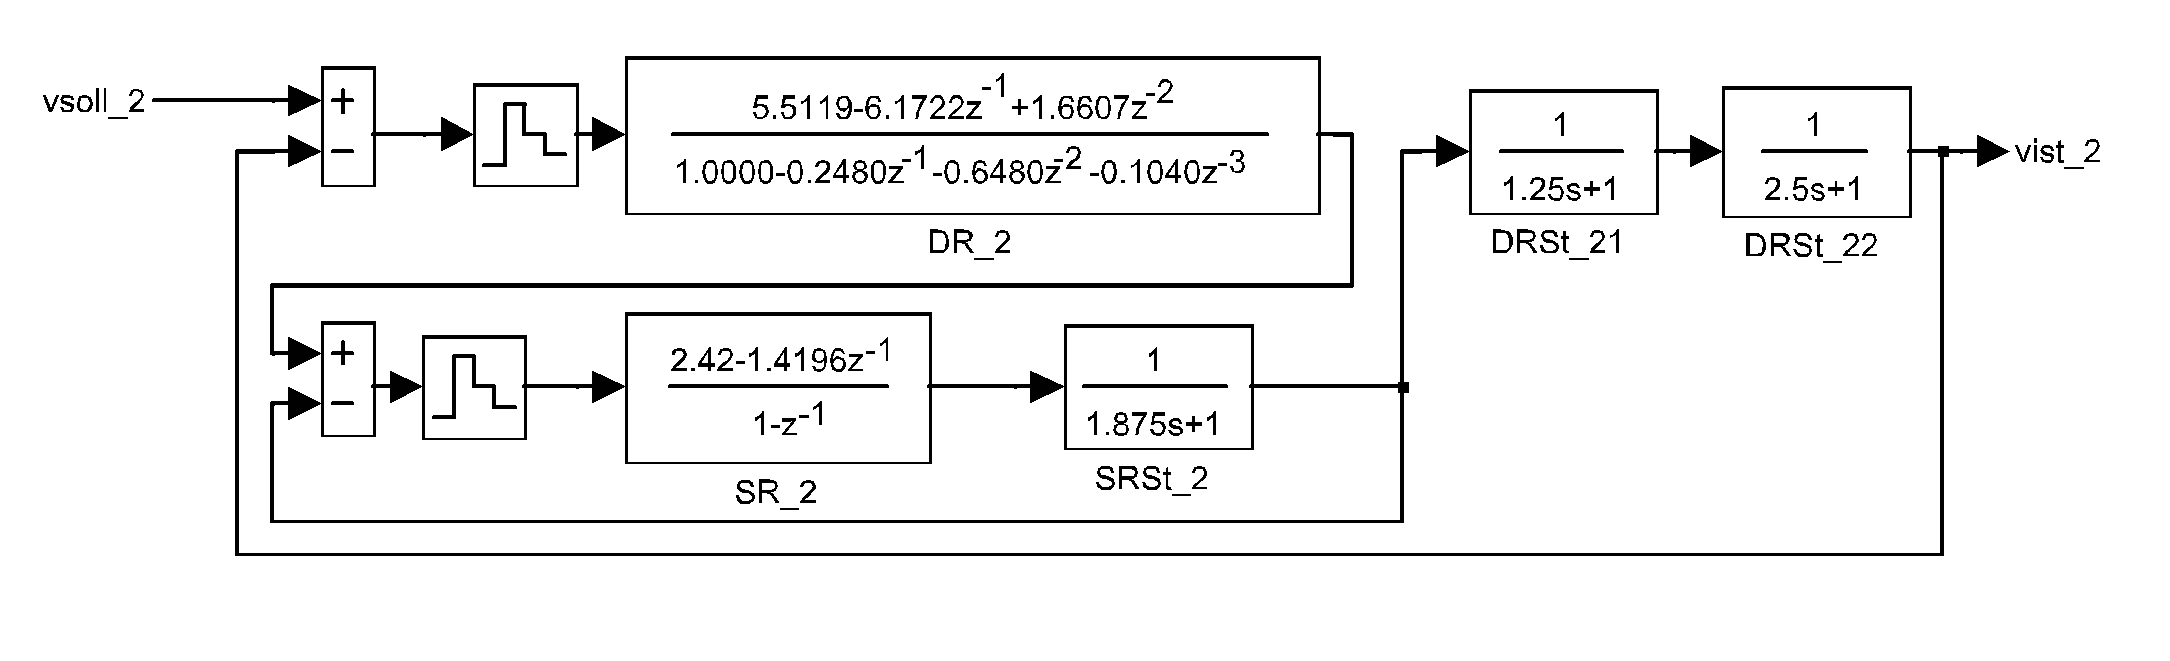 FUP example 9 - drive 2